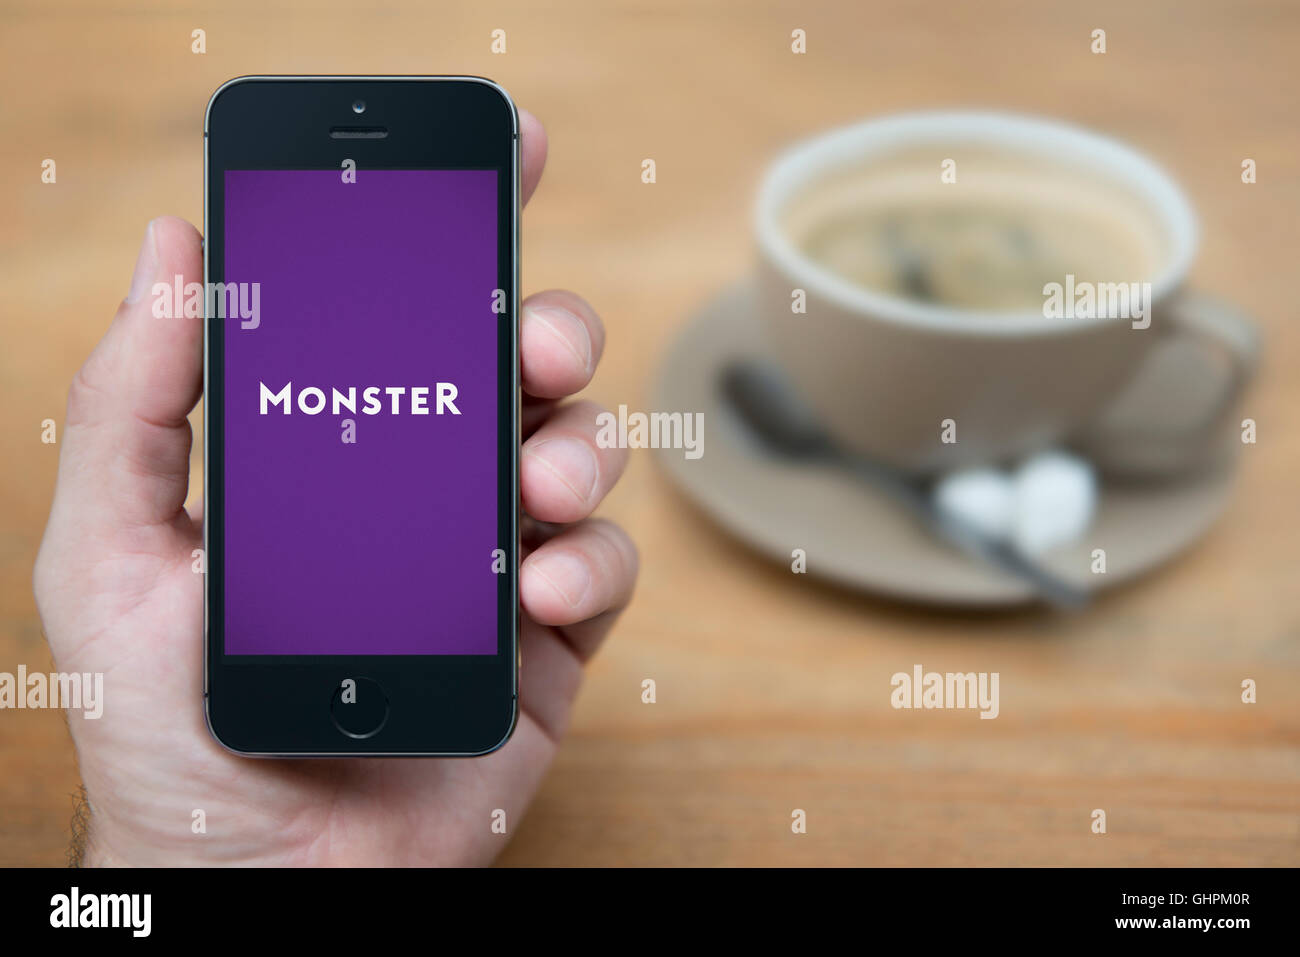 A man looks at his iPhone which displays the Monster logo, while sat with a cup of coffee (Editorial use only). Stock Photo